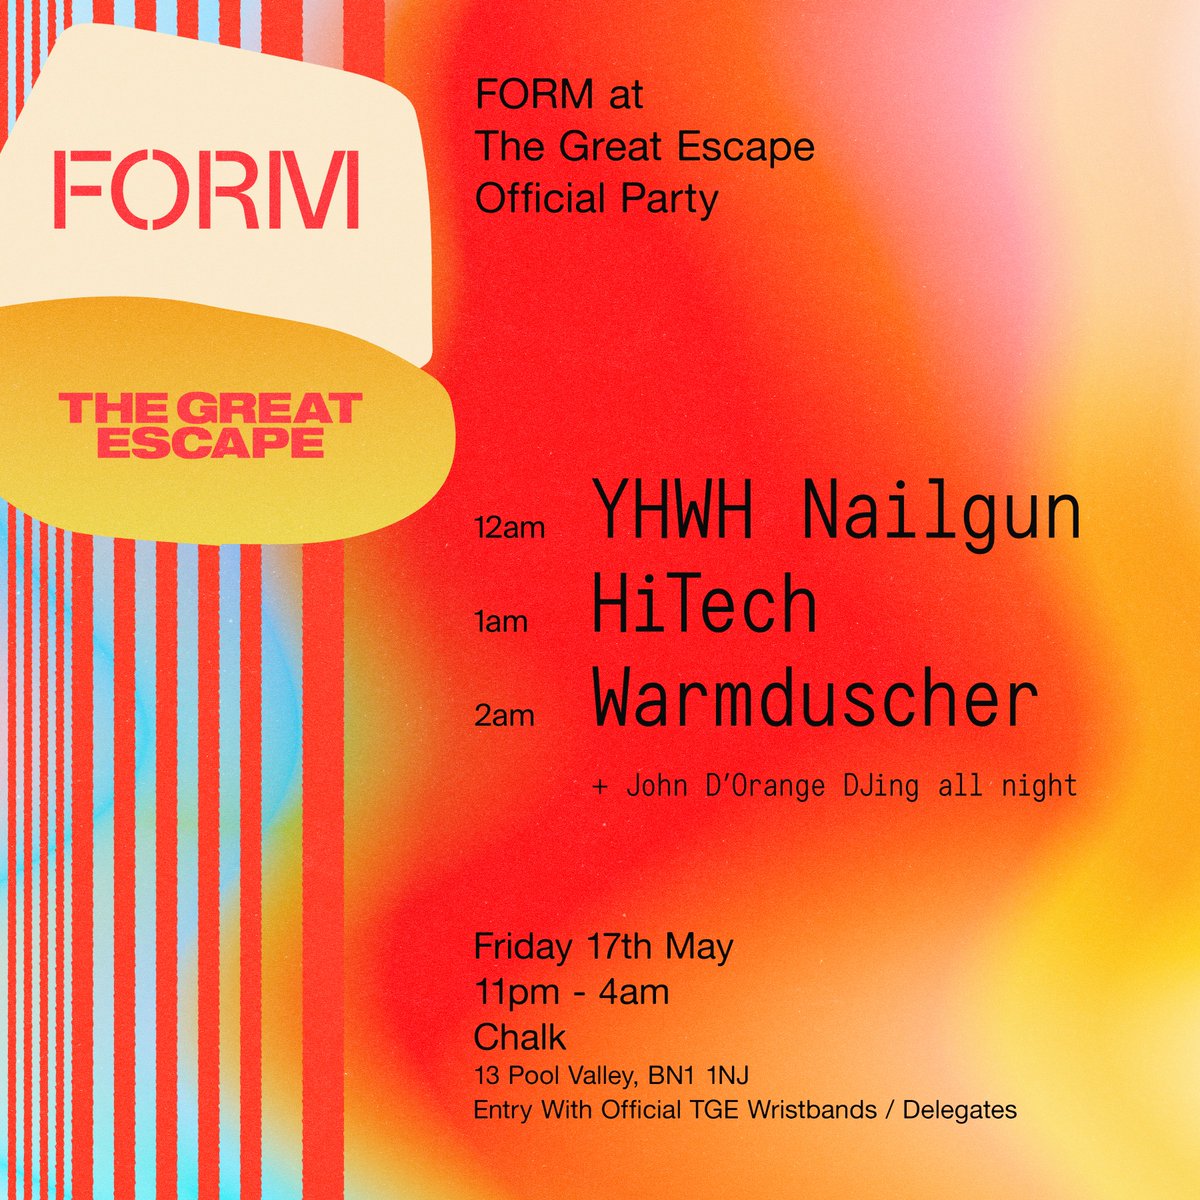 Announcing our official Great Escape late night party at Brighton’s best live music venue @chalkvenue (entry with official TGE wristbands / delegate passes) with three very exciting performances from YHWH Nailgun (who blew us away at SXSW), HiTech and the ever incredible